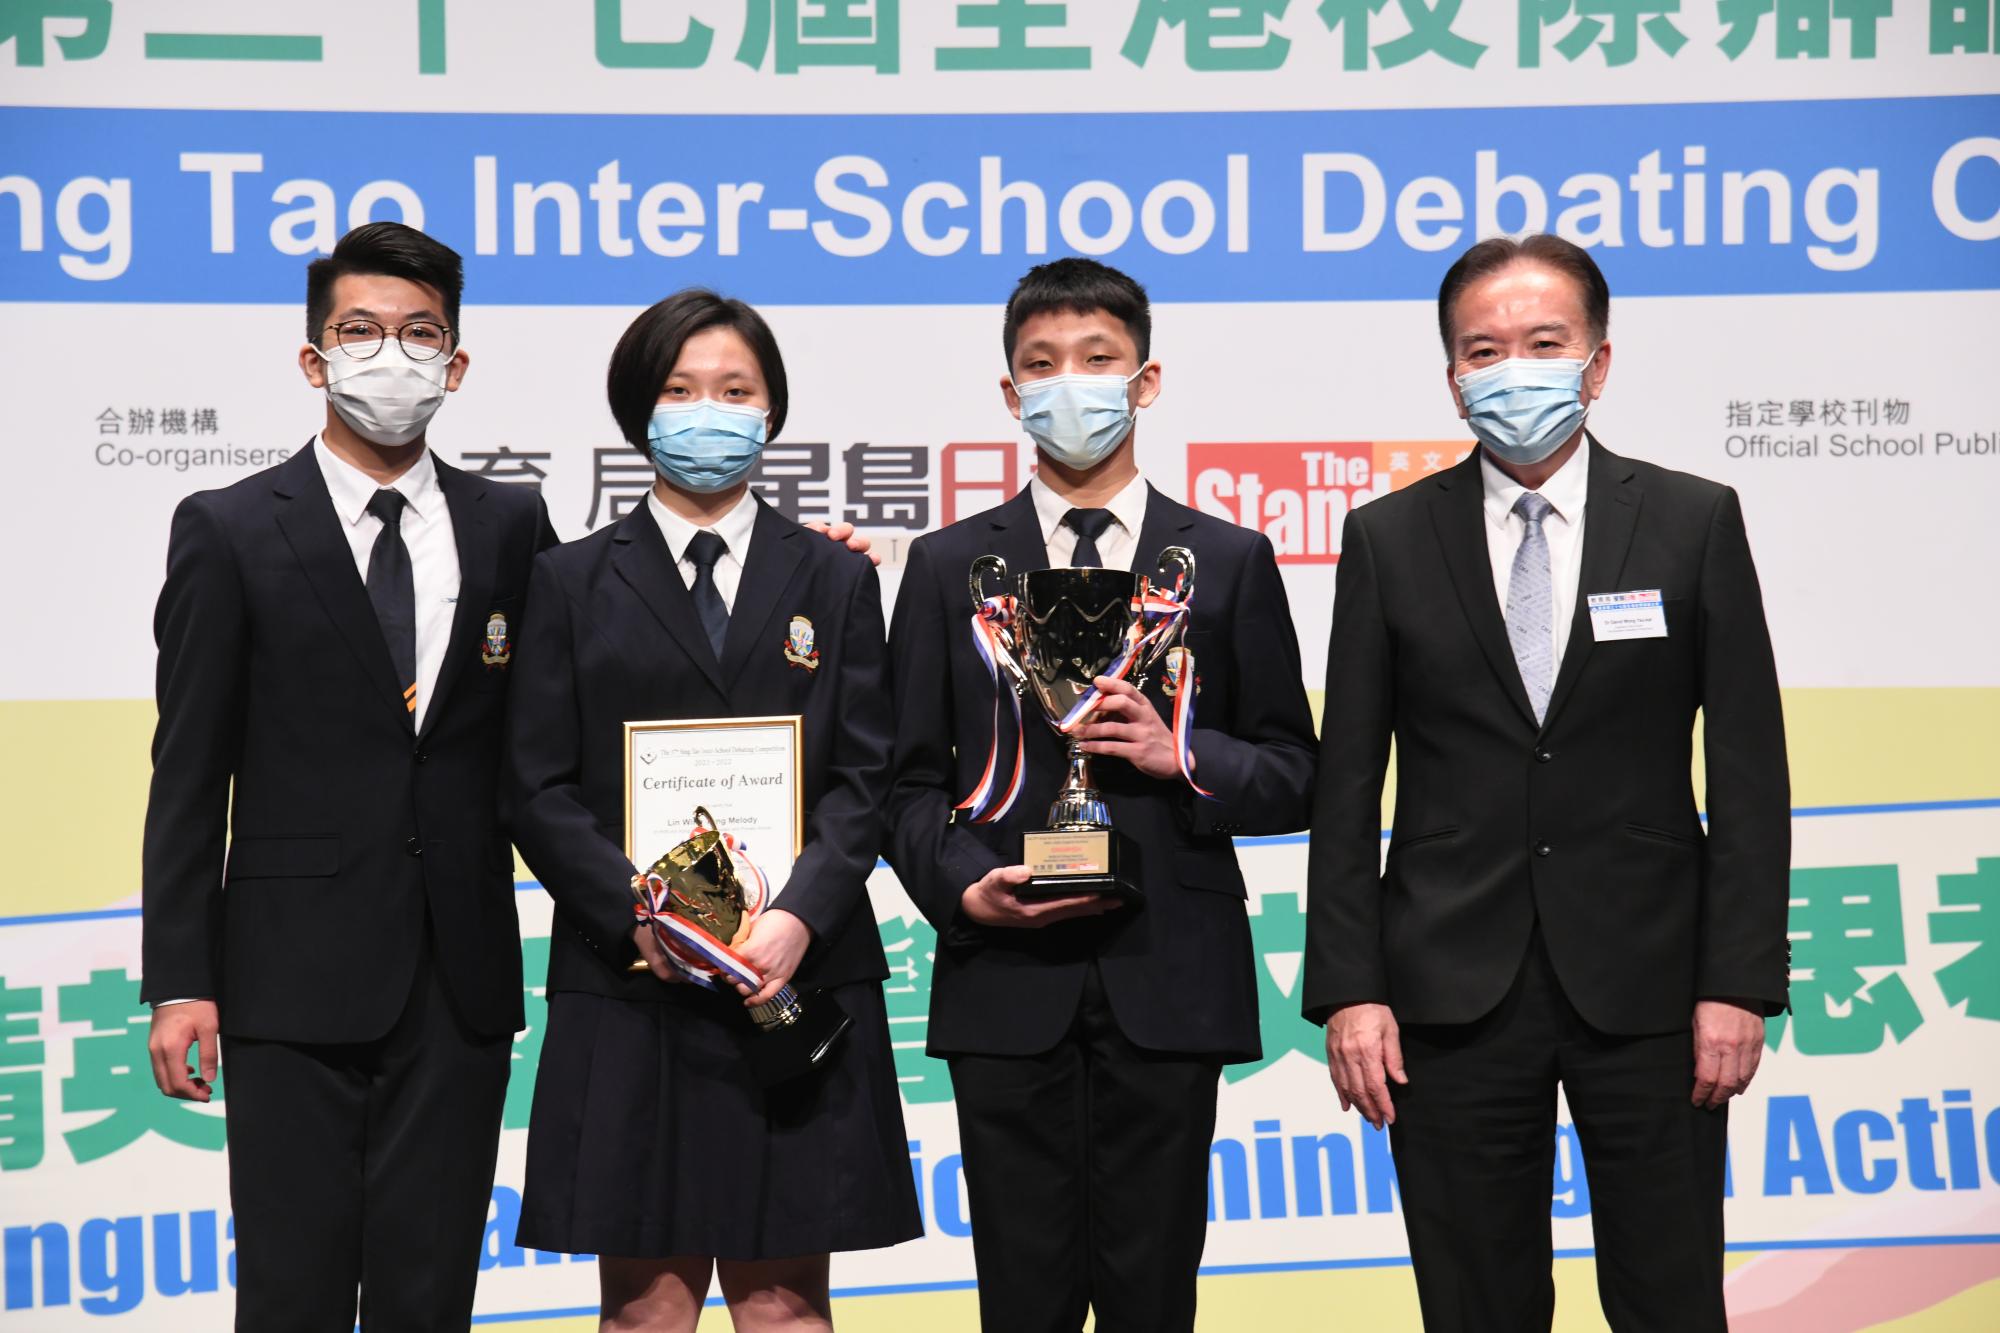 Our students were crowned Champion of The 37th & 38th Sing Tao Inter-School Debating Competition (English Section) two years in a row.